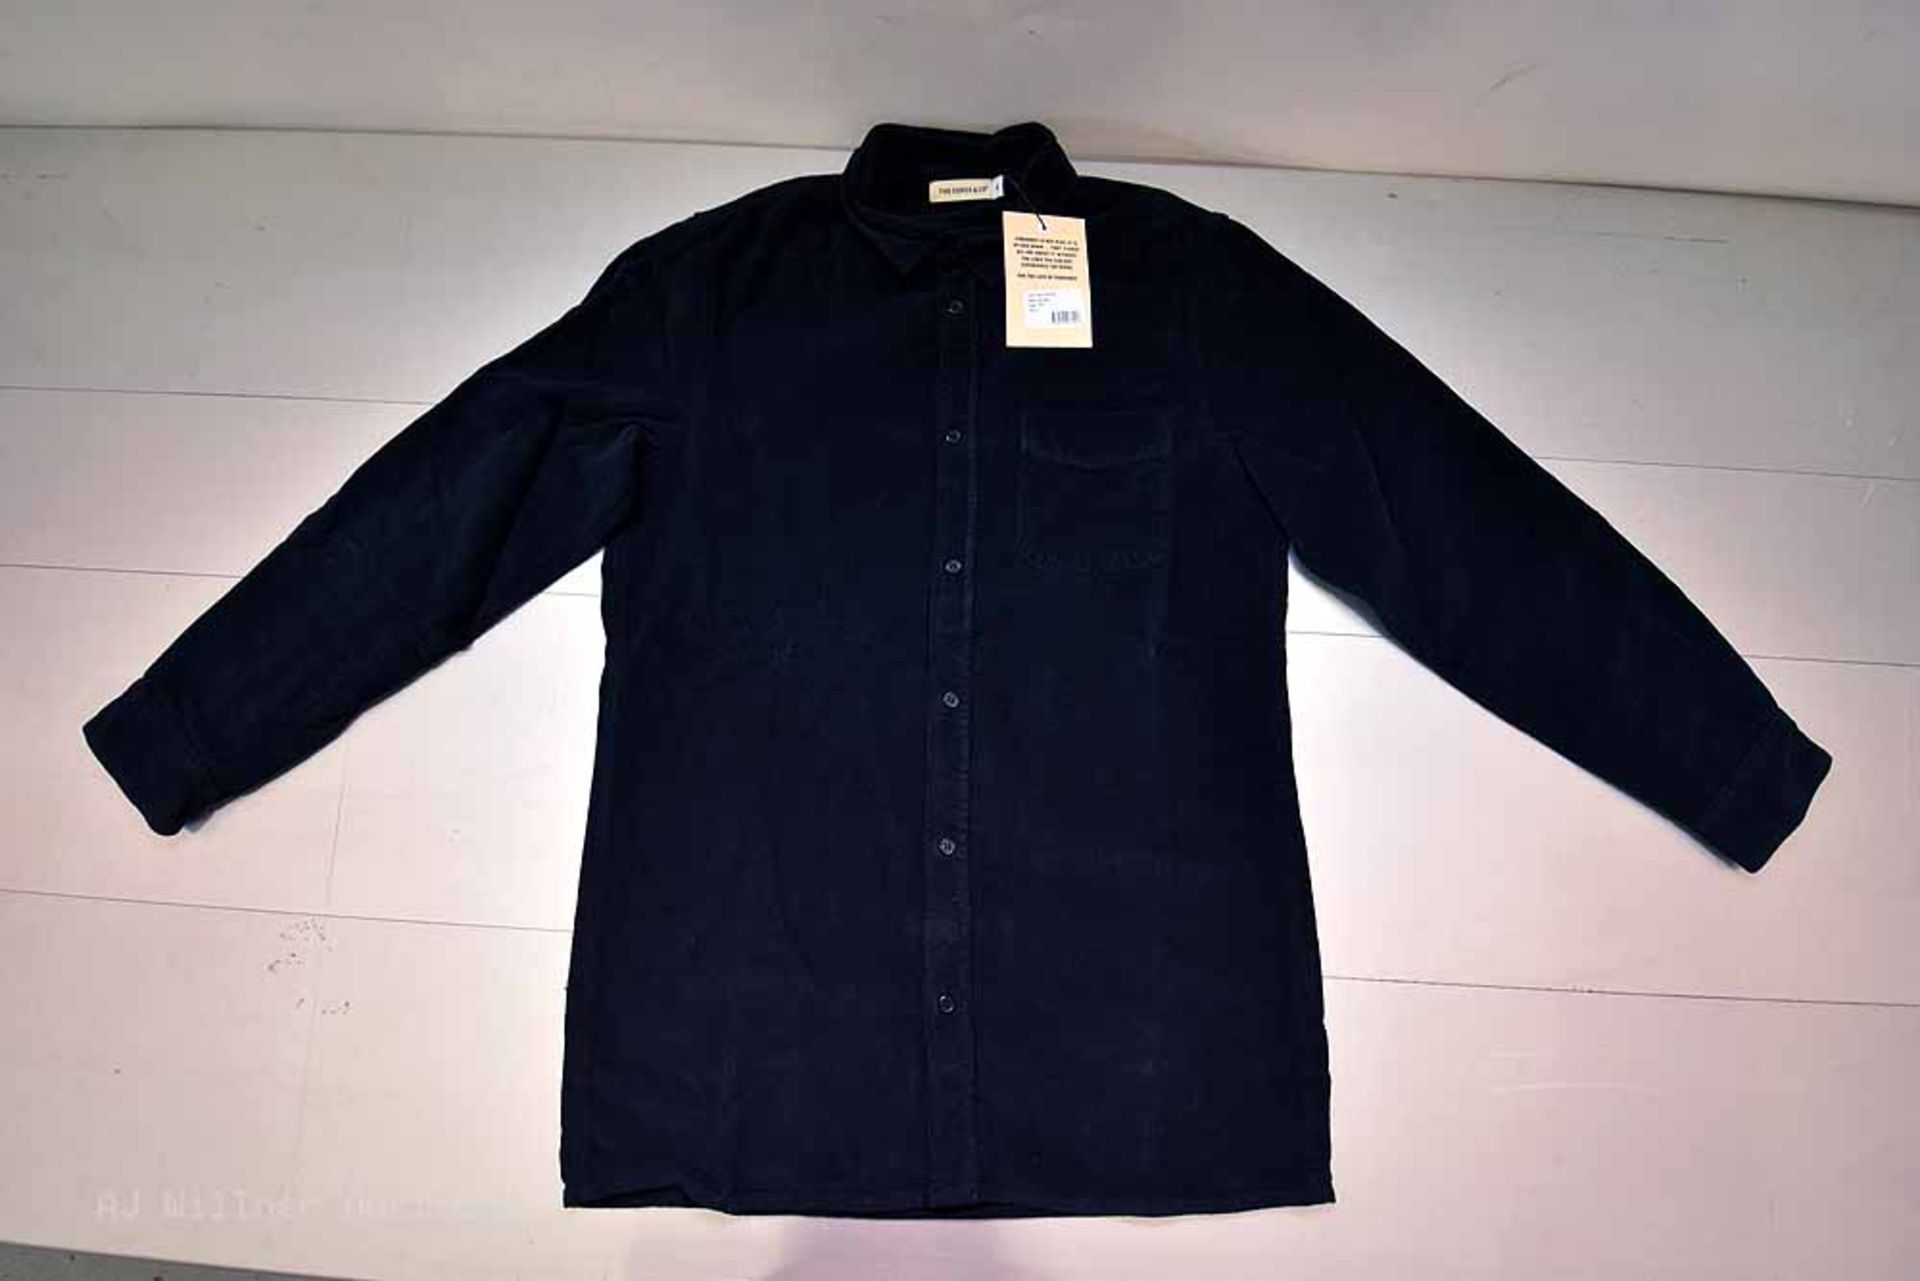 The Cords & Co. "Ossp" Style, Uni-Sex Collard Long Sleeve Shirt Iconic Green,Black - Image 7 of 9